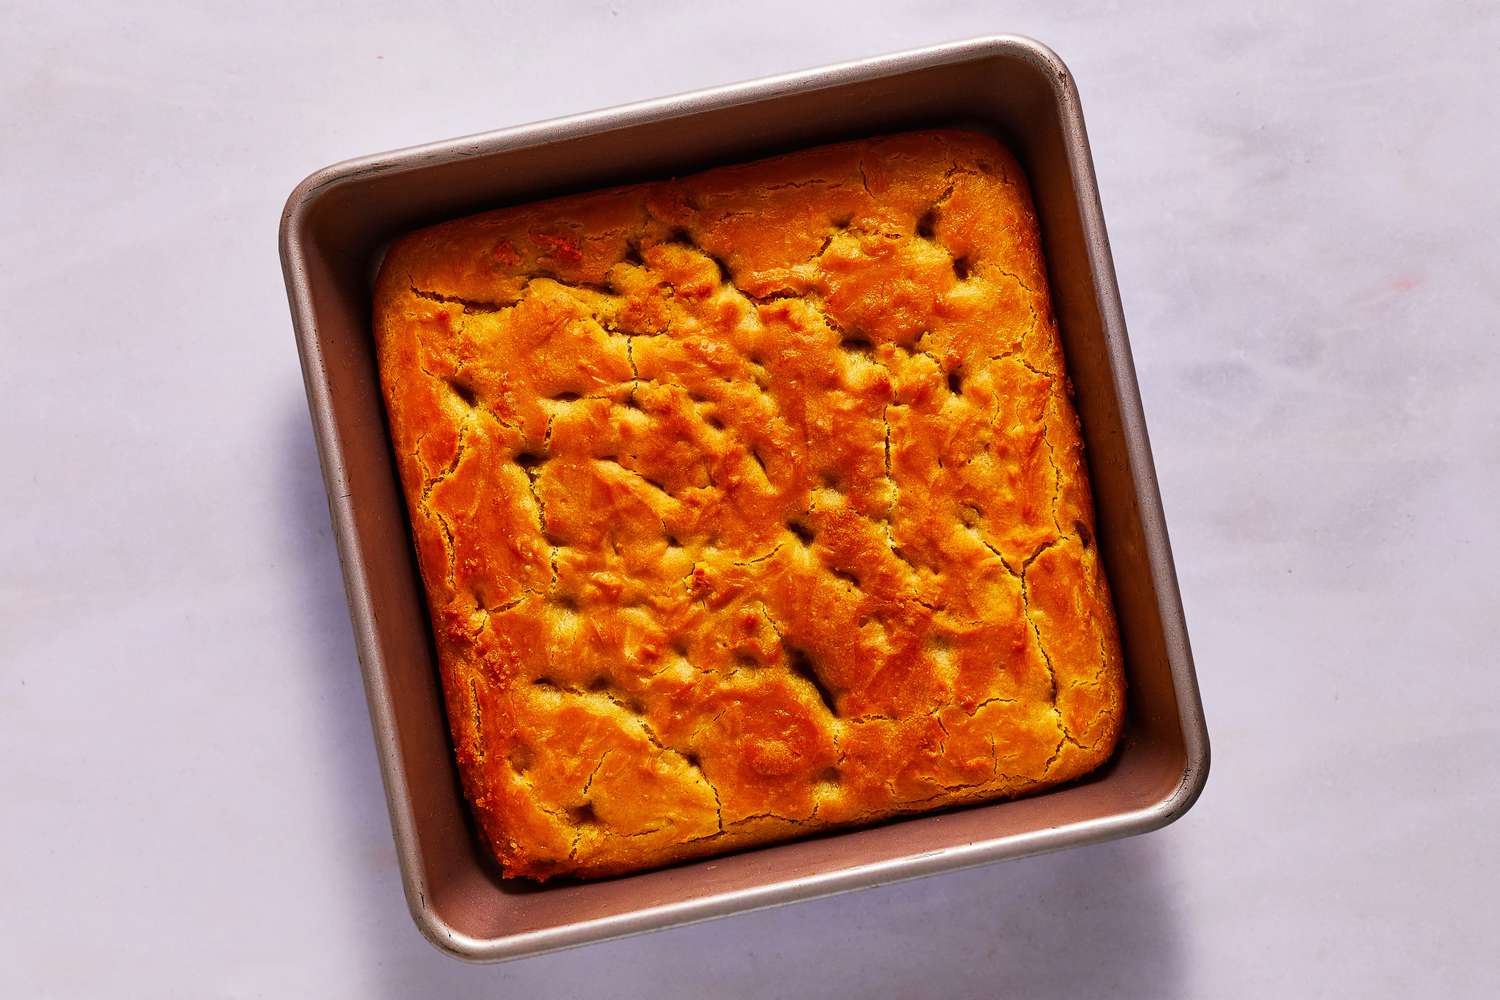 baked gluten free focaccia in pan